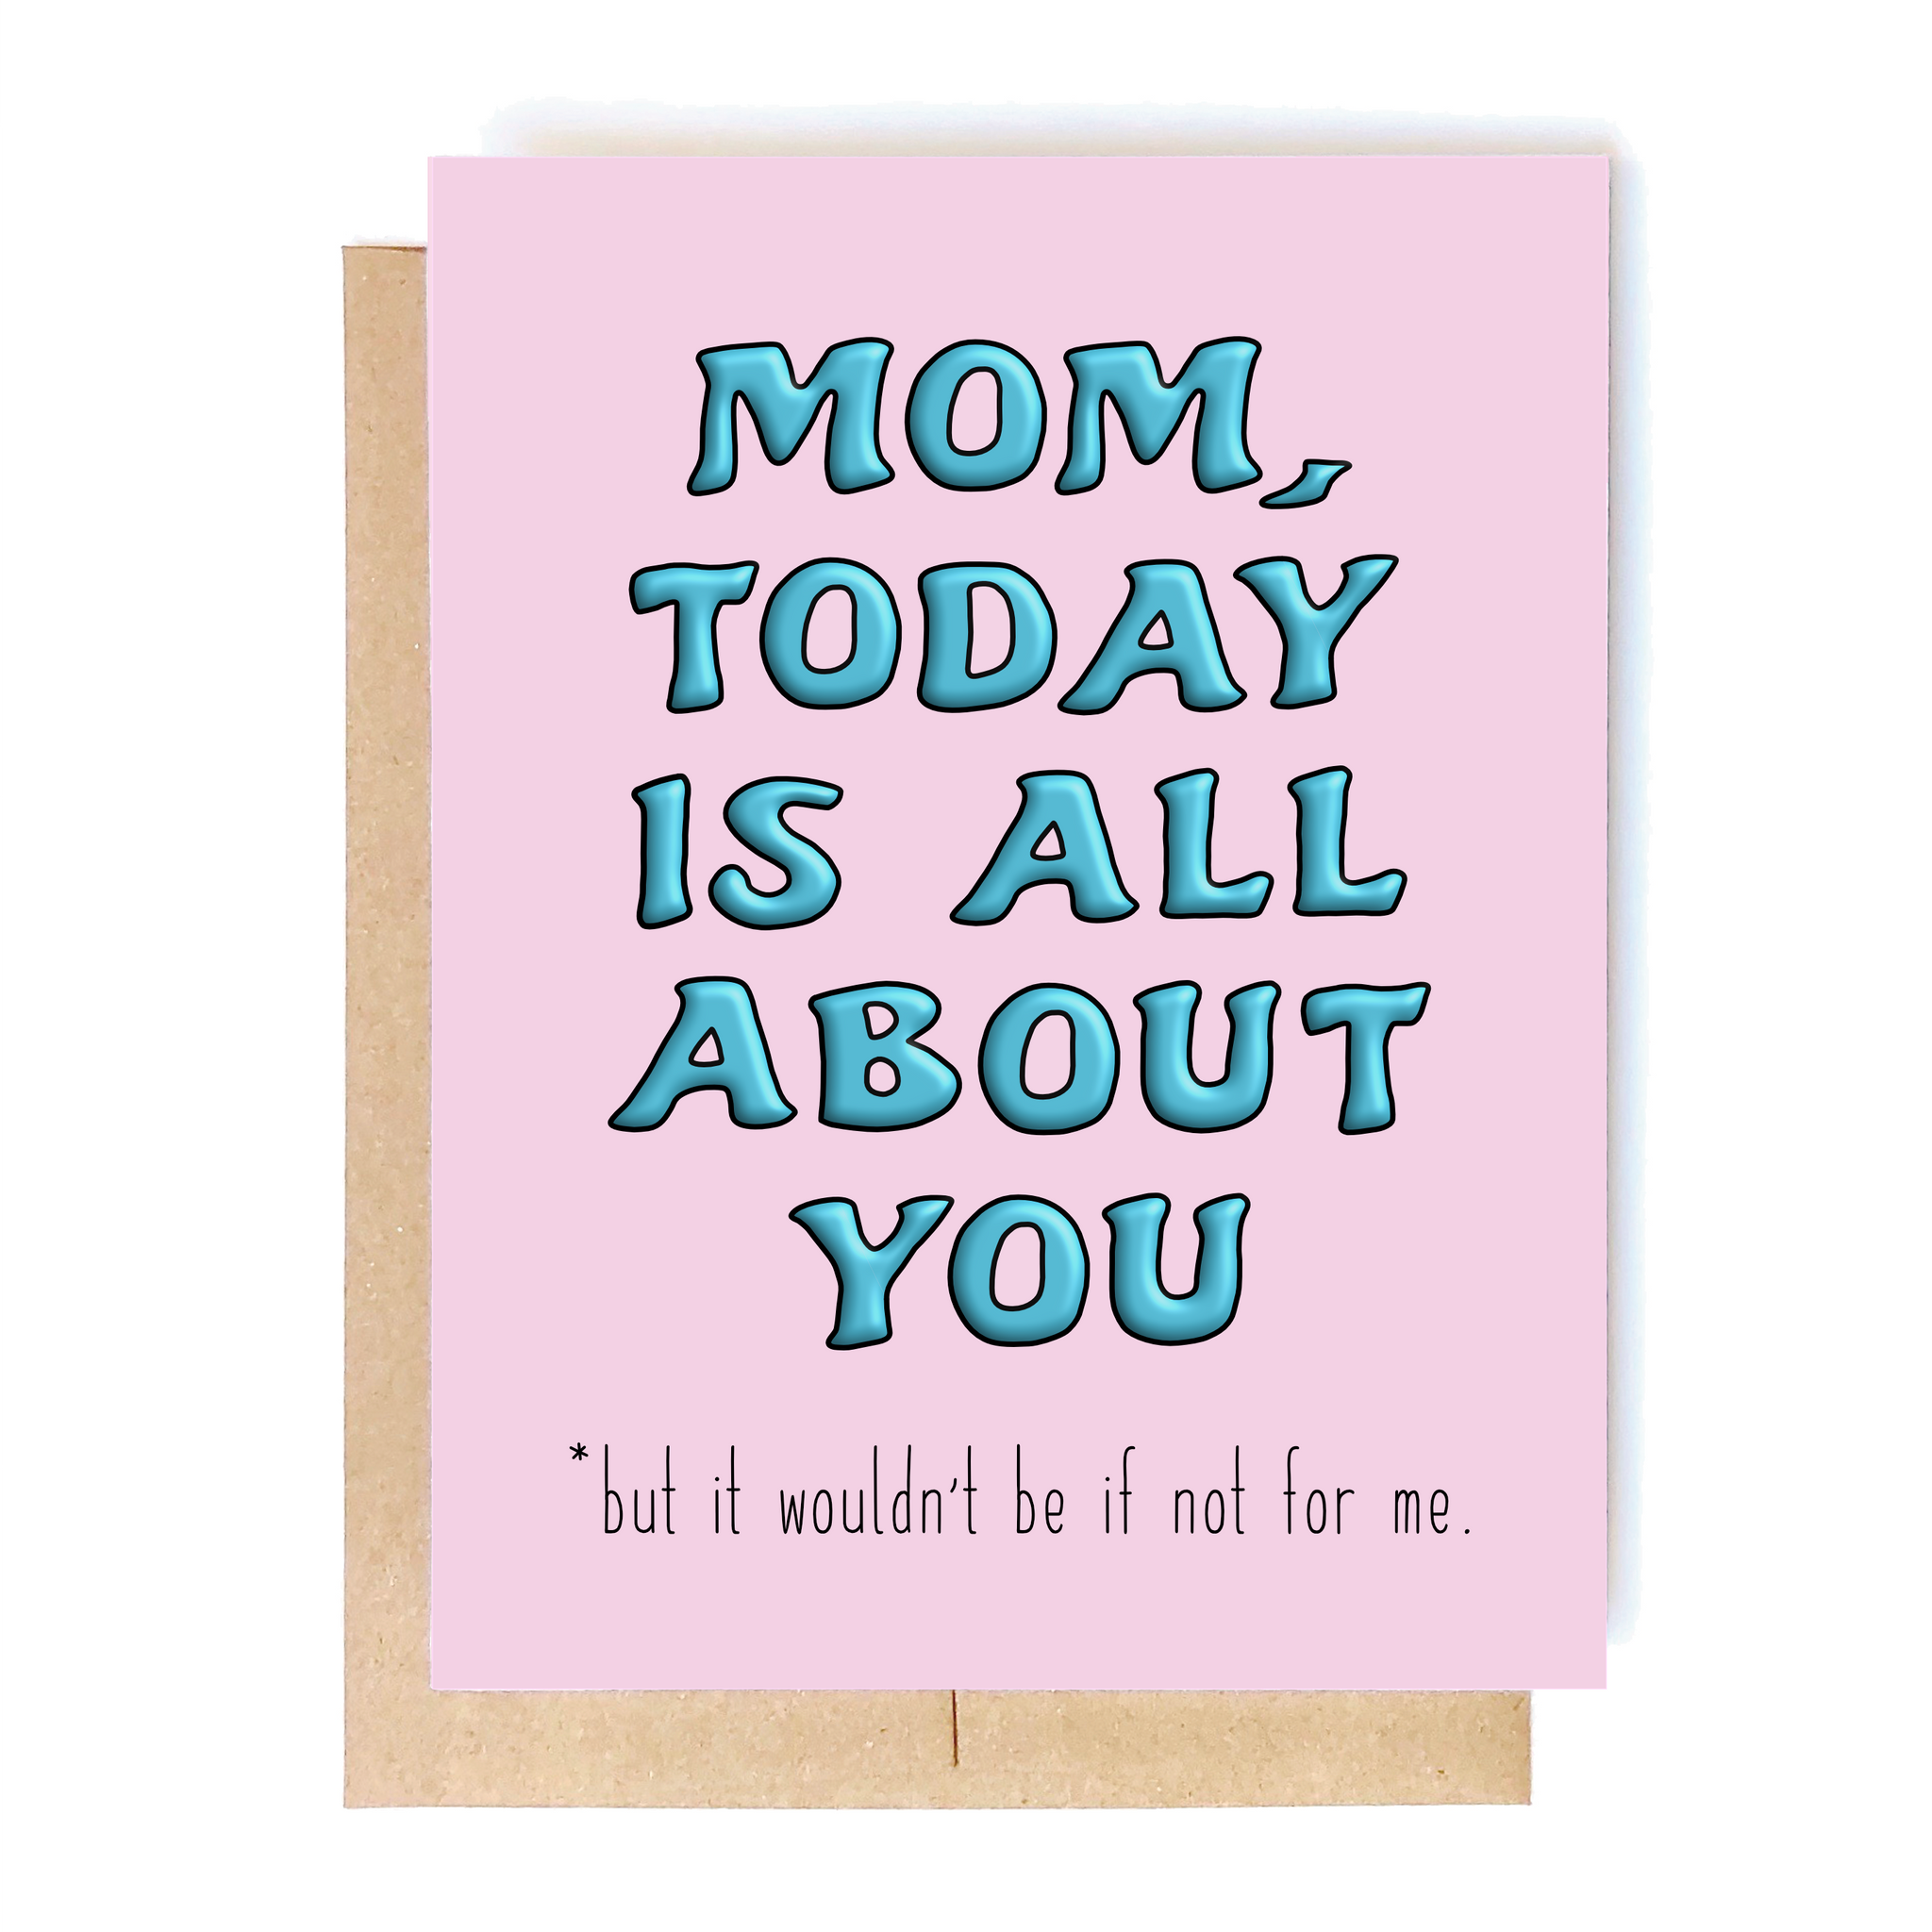 Card Front: Mom, today is all about you. But it wouldn't be if not for me.